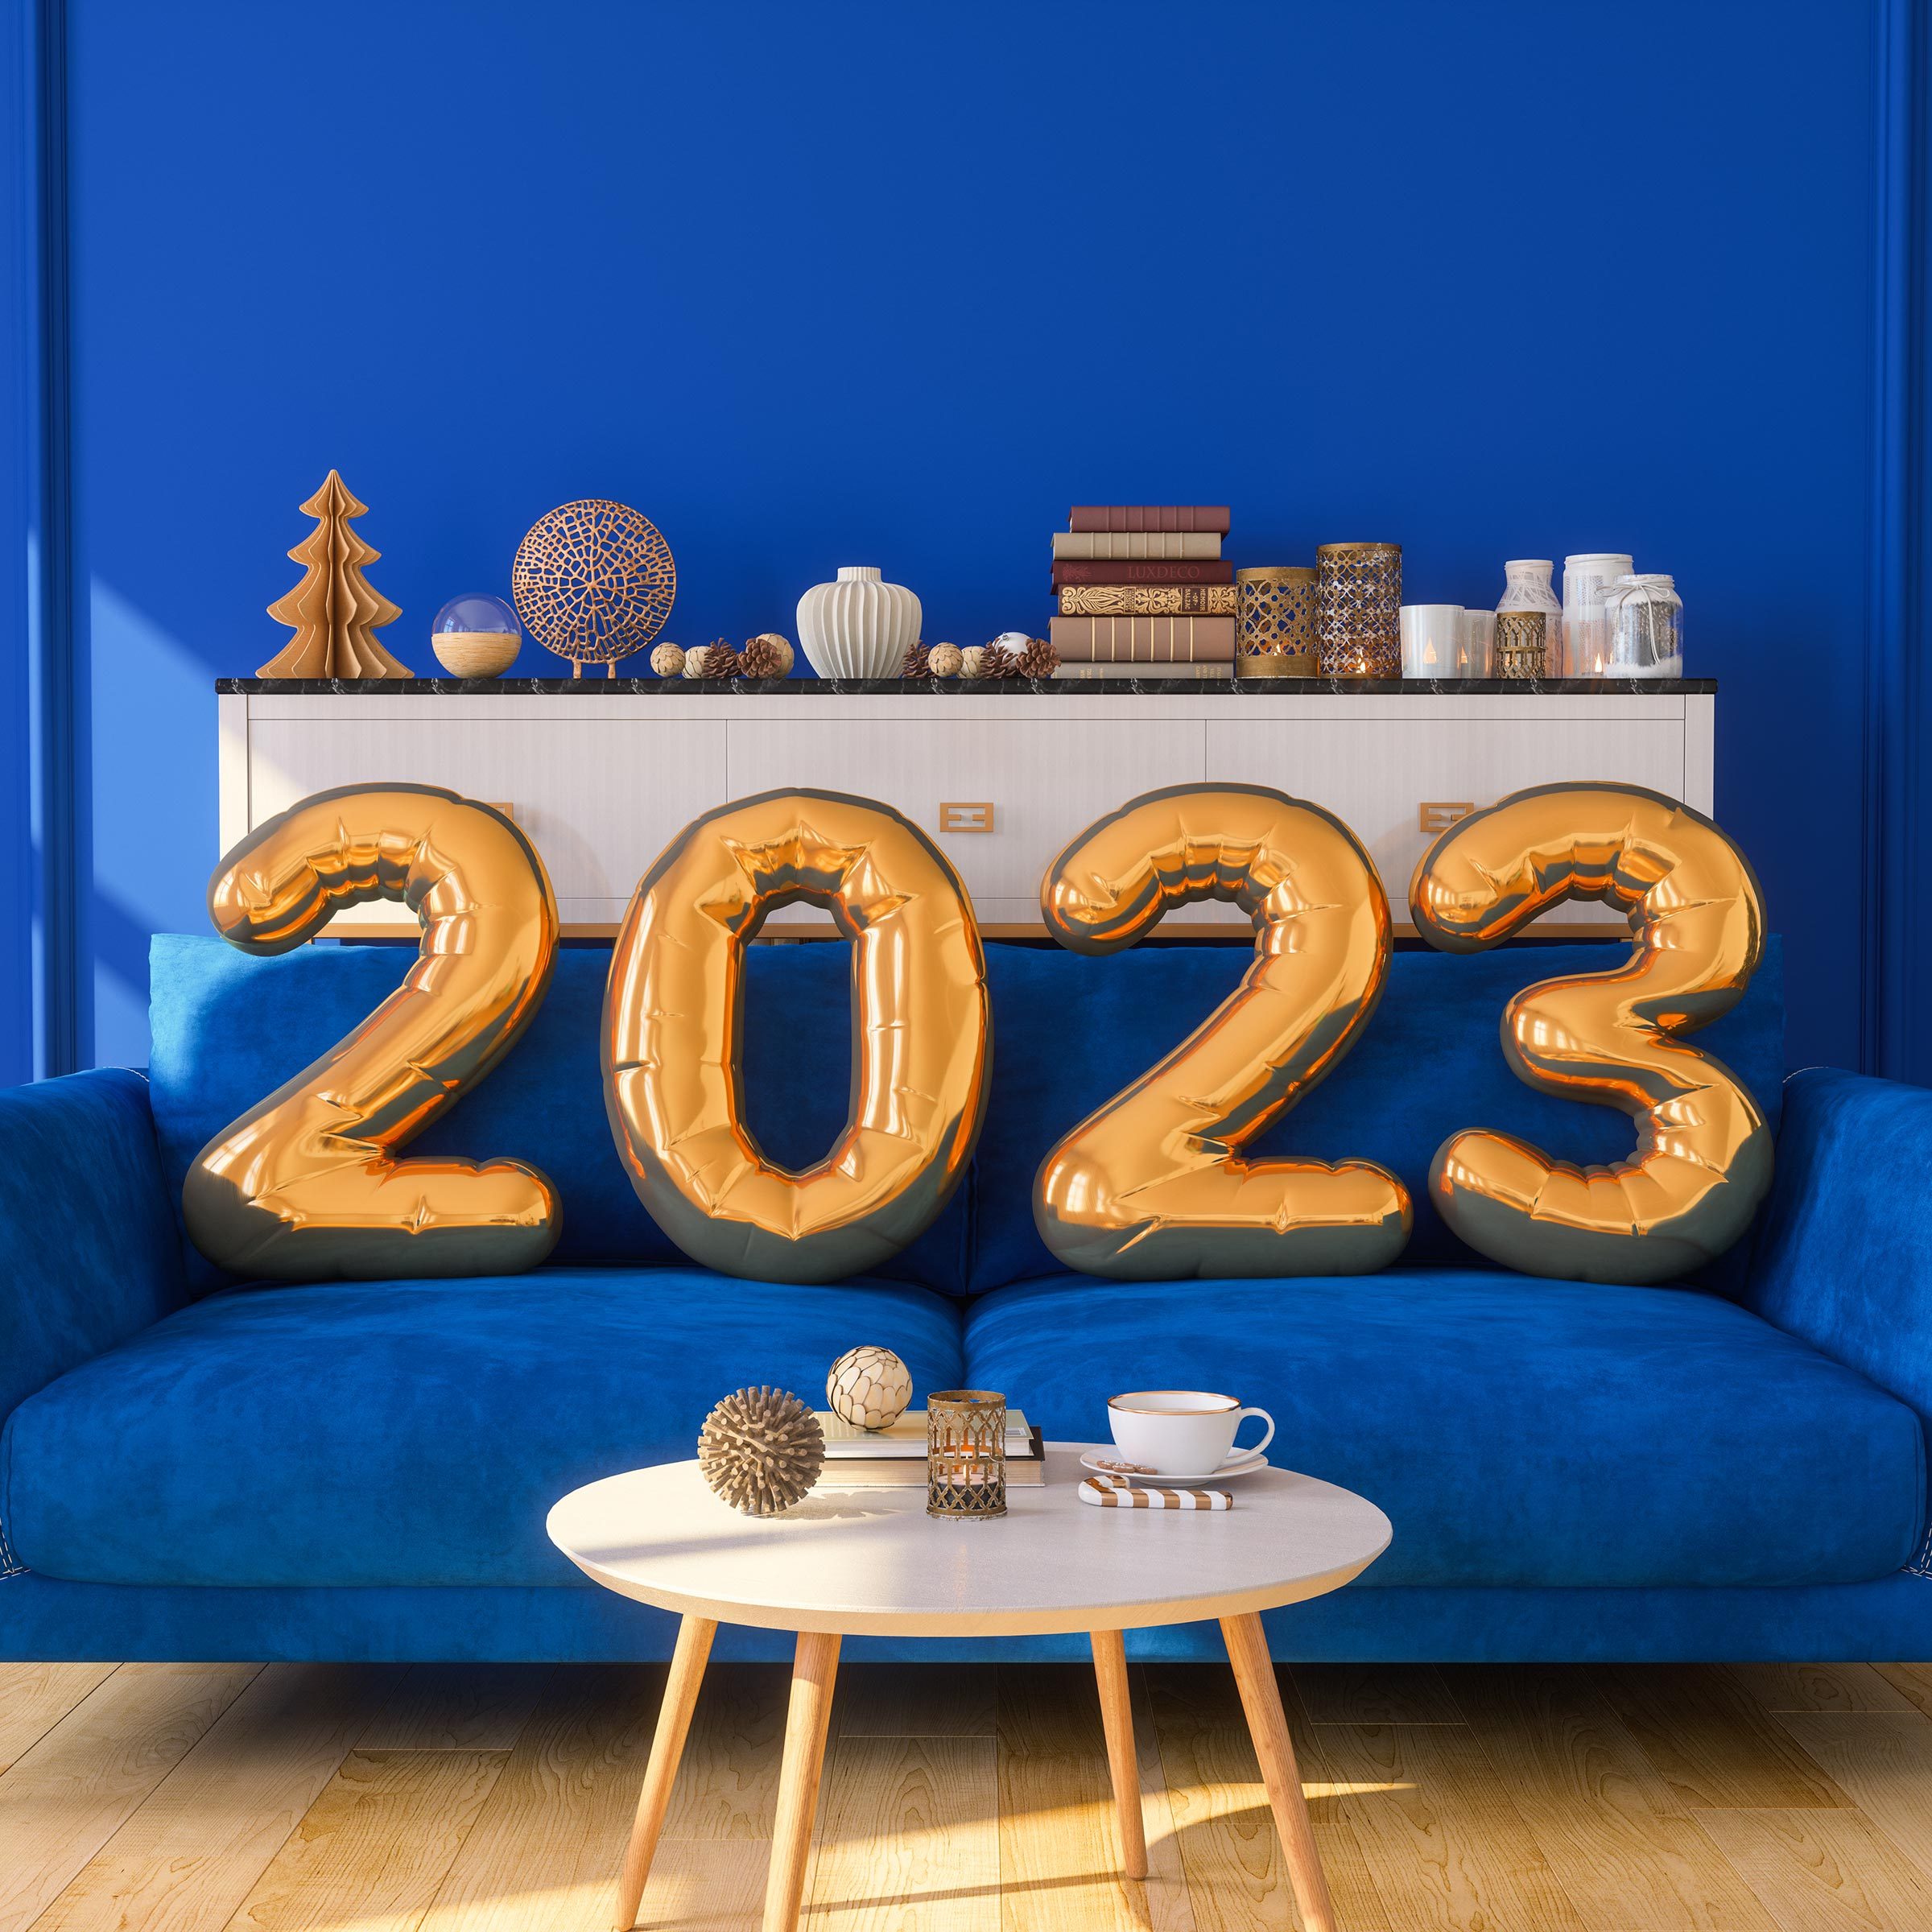 5 Interior Design Trends That Will Be Everywhere in 2023